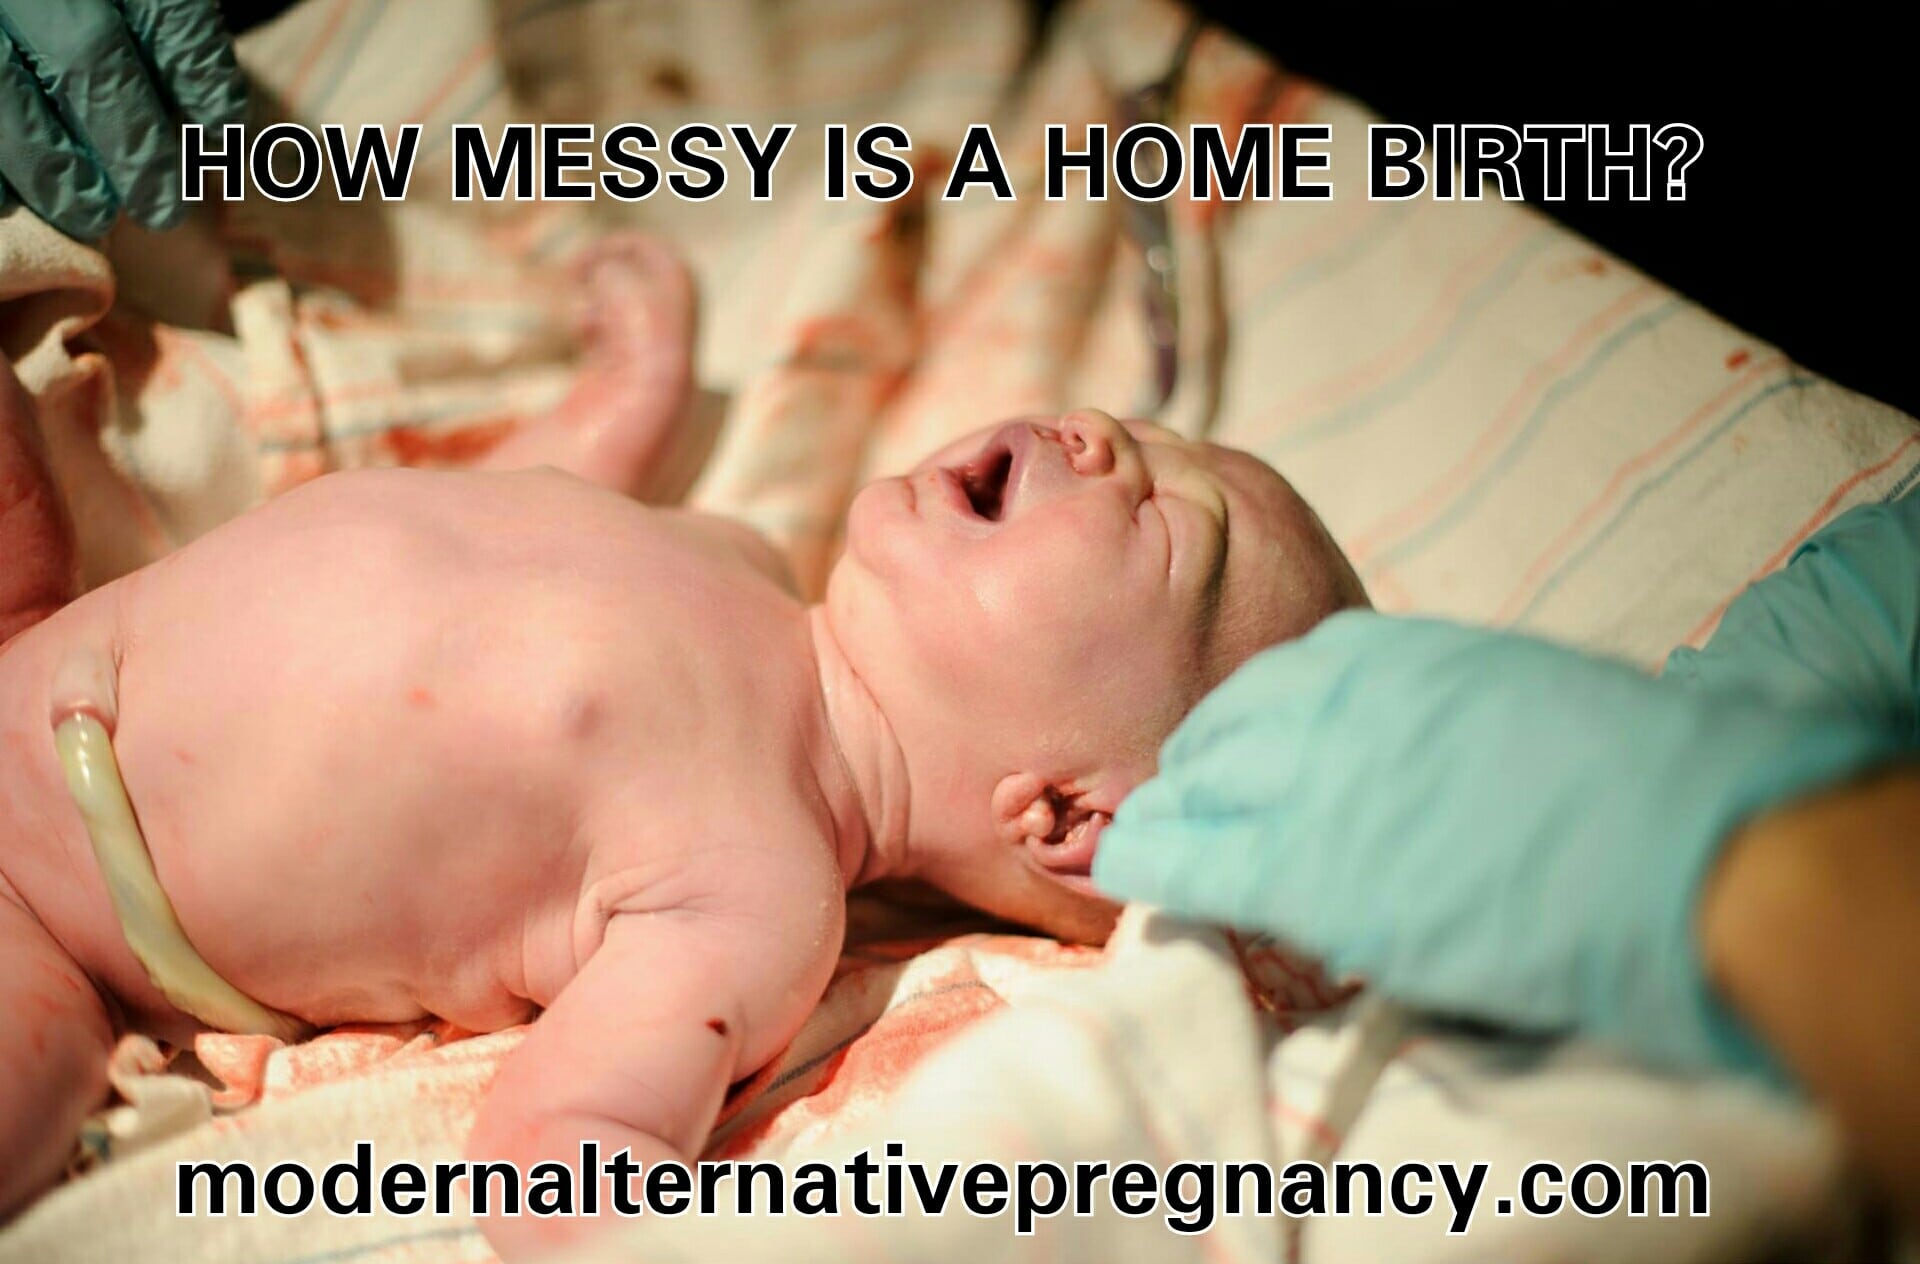 How Messy IS a Home Birth?